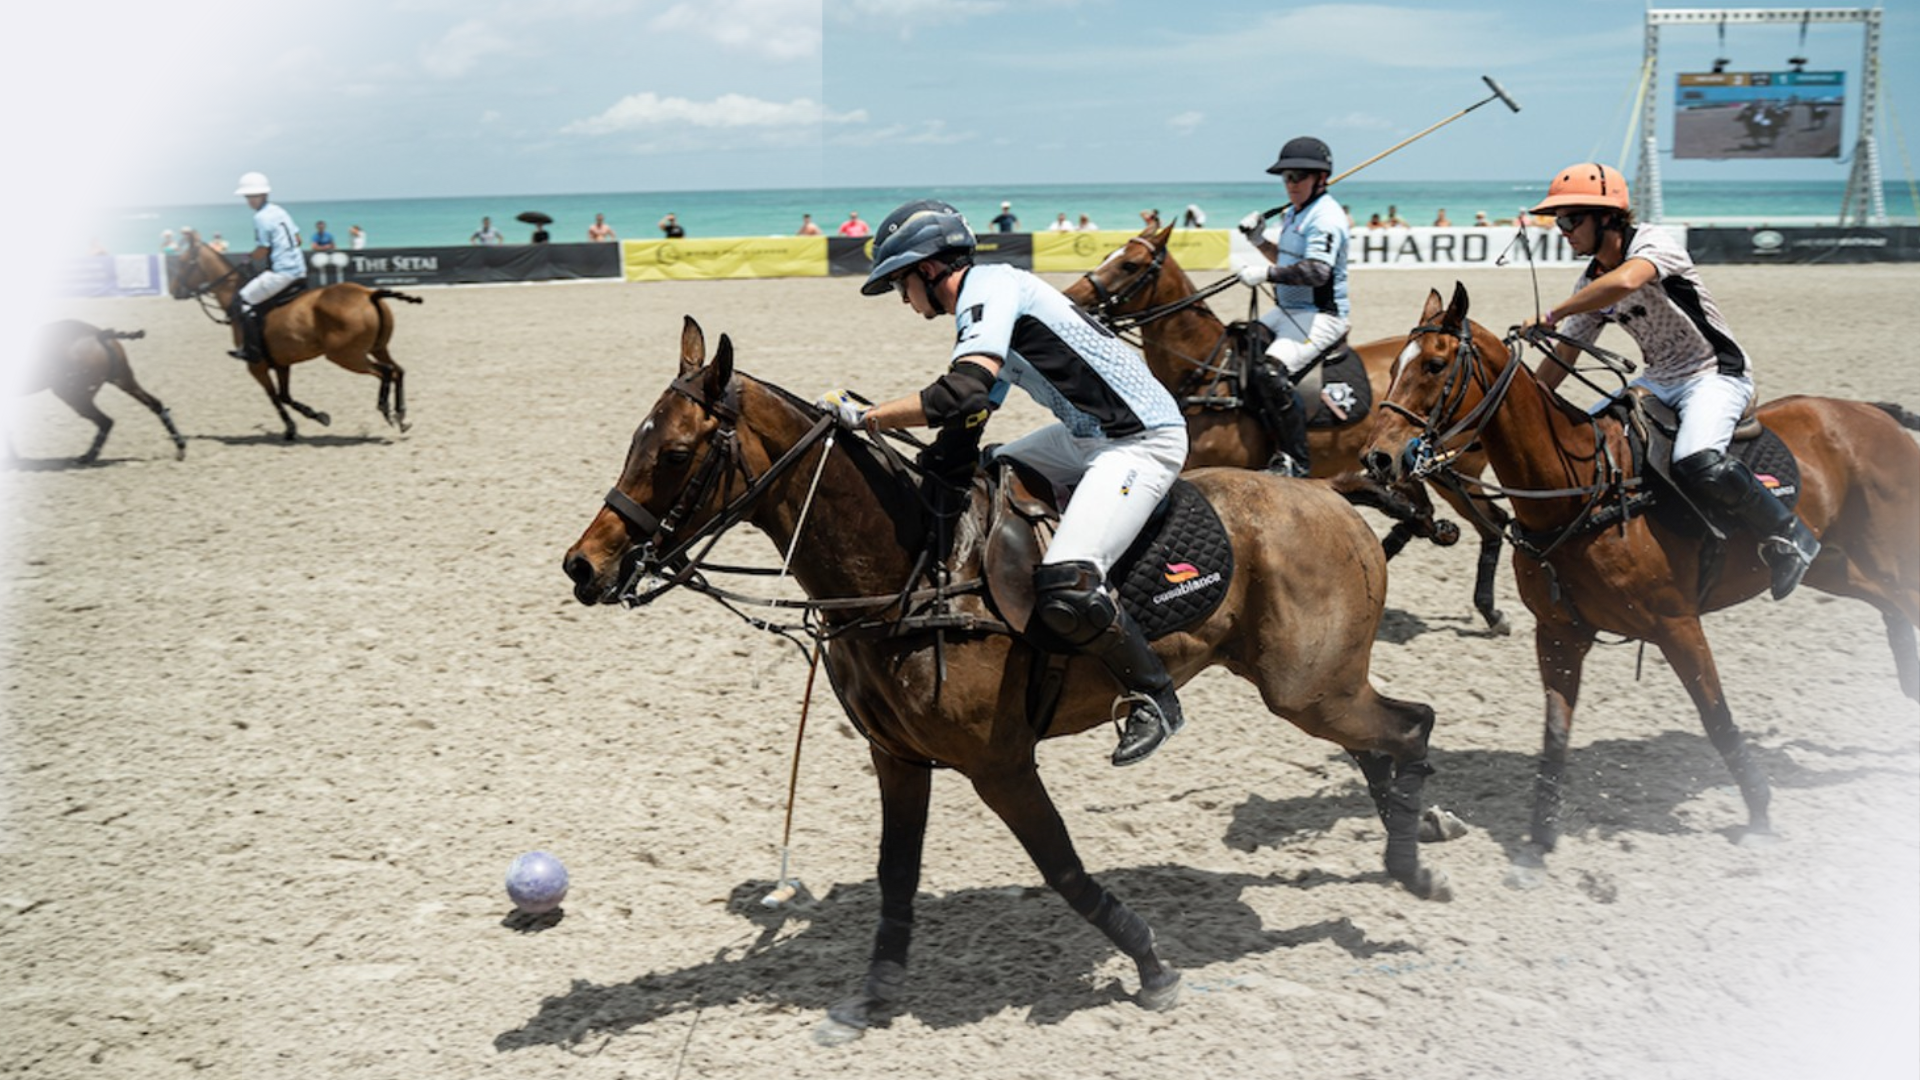 The Beach Polo World Cup in Miami – The Largest & Most Notable of Its Kind